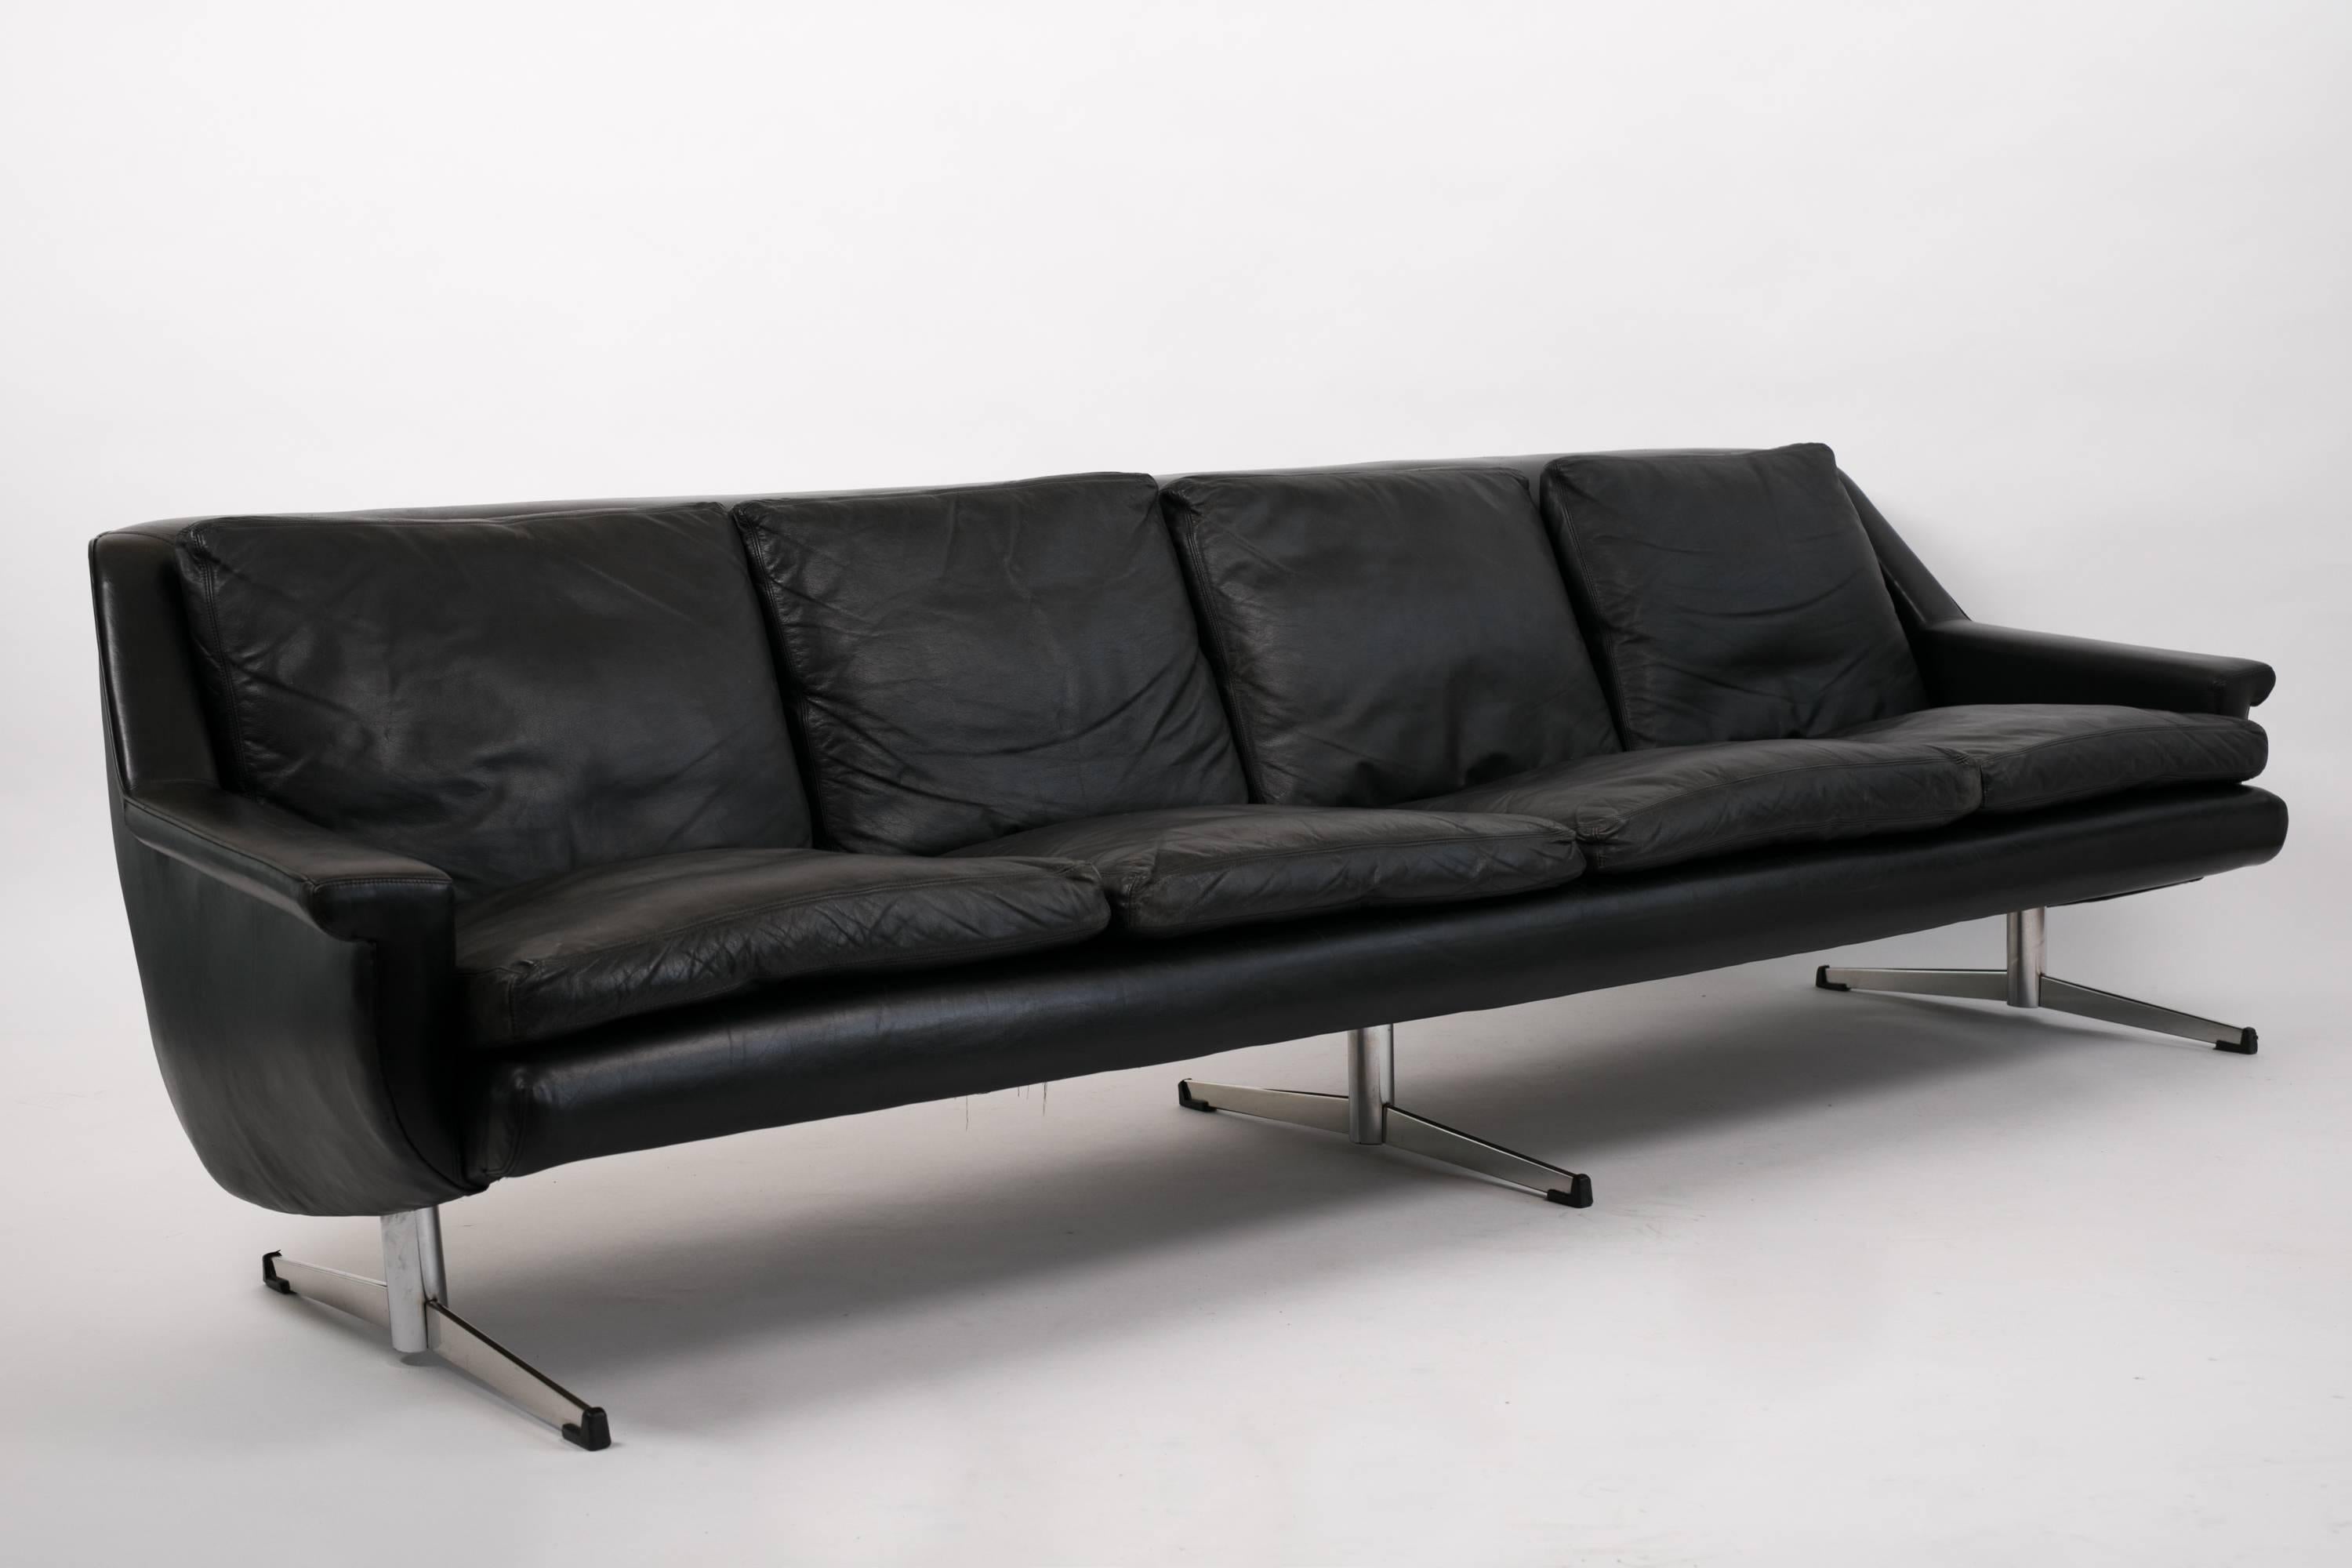 A long Danish modern sofa in beautifully worn black leather designed by Georg Thams for Vejen Polstermøbelfabrik. This example has four seats with removable back and seat cushions, held in a molded case upholstered in matching leather. The flat